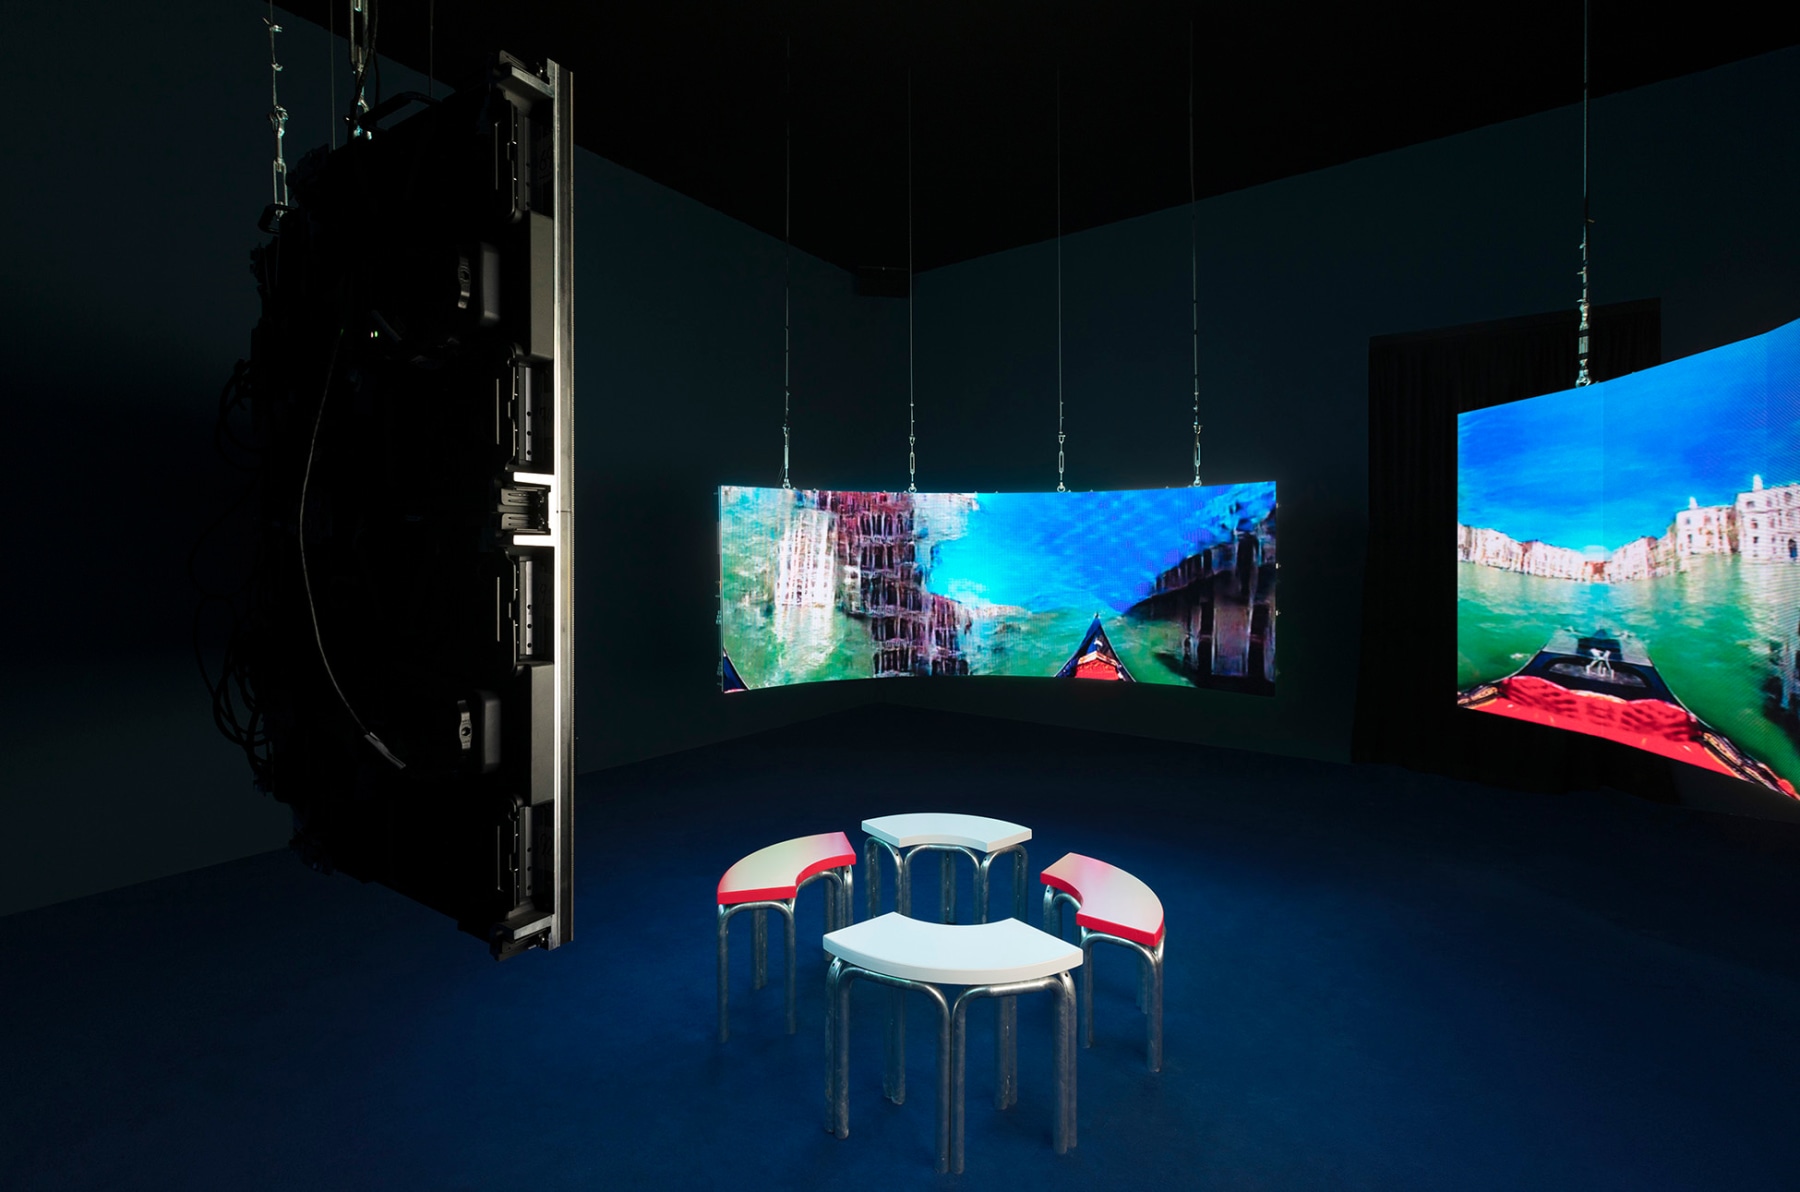 Hito Steyerl,&nbsp;May You Live In Interesting Times, May 11 - November 24, 2019,&nbsp;58th Venice Biennale, Italy&nbsp;